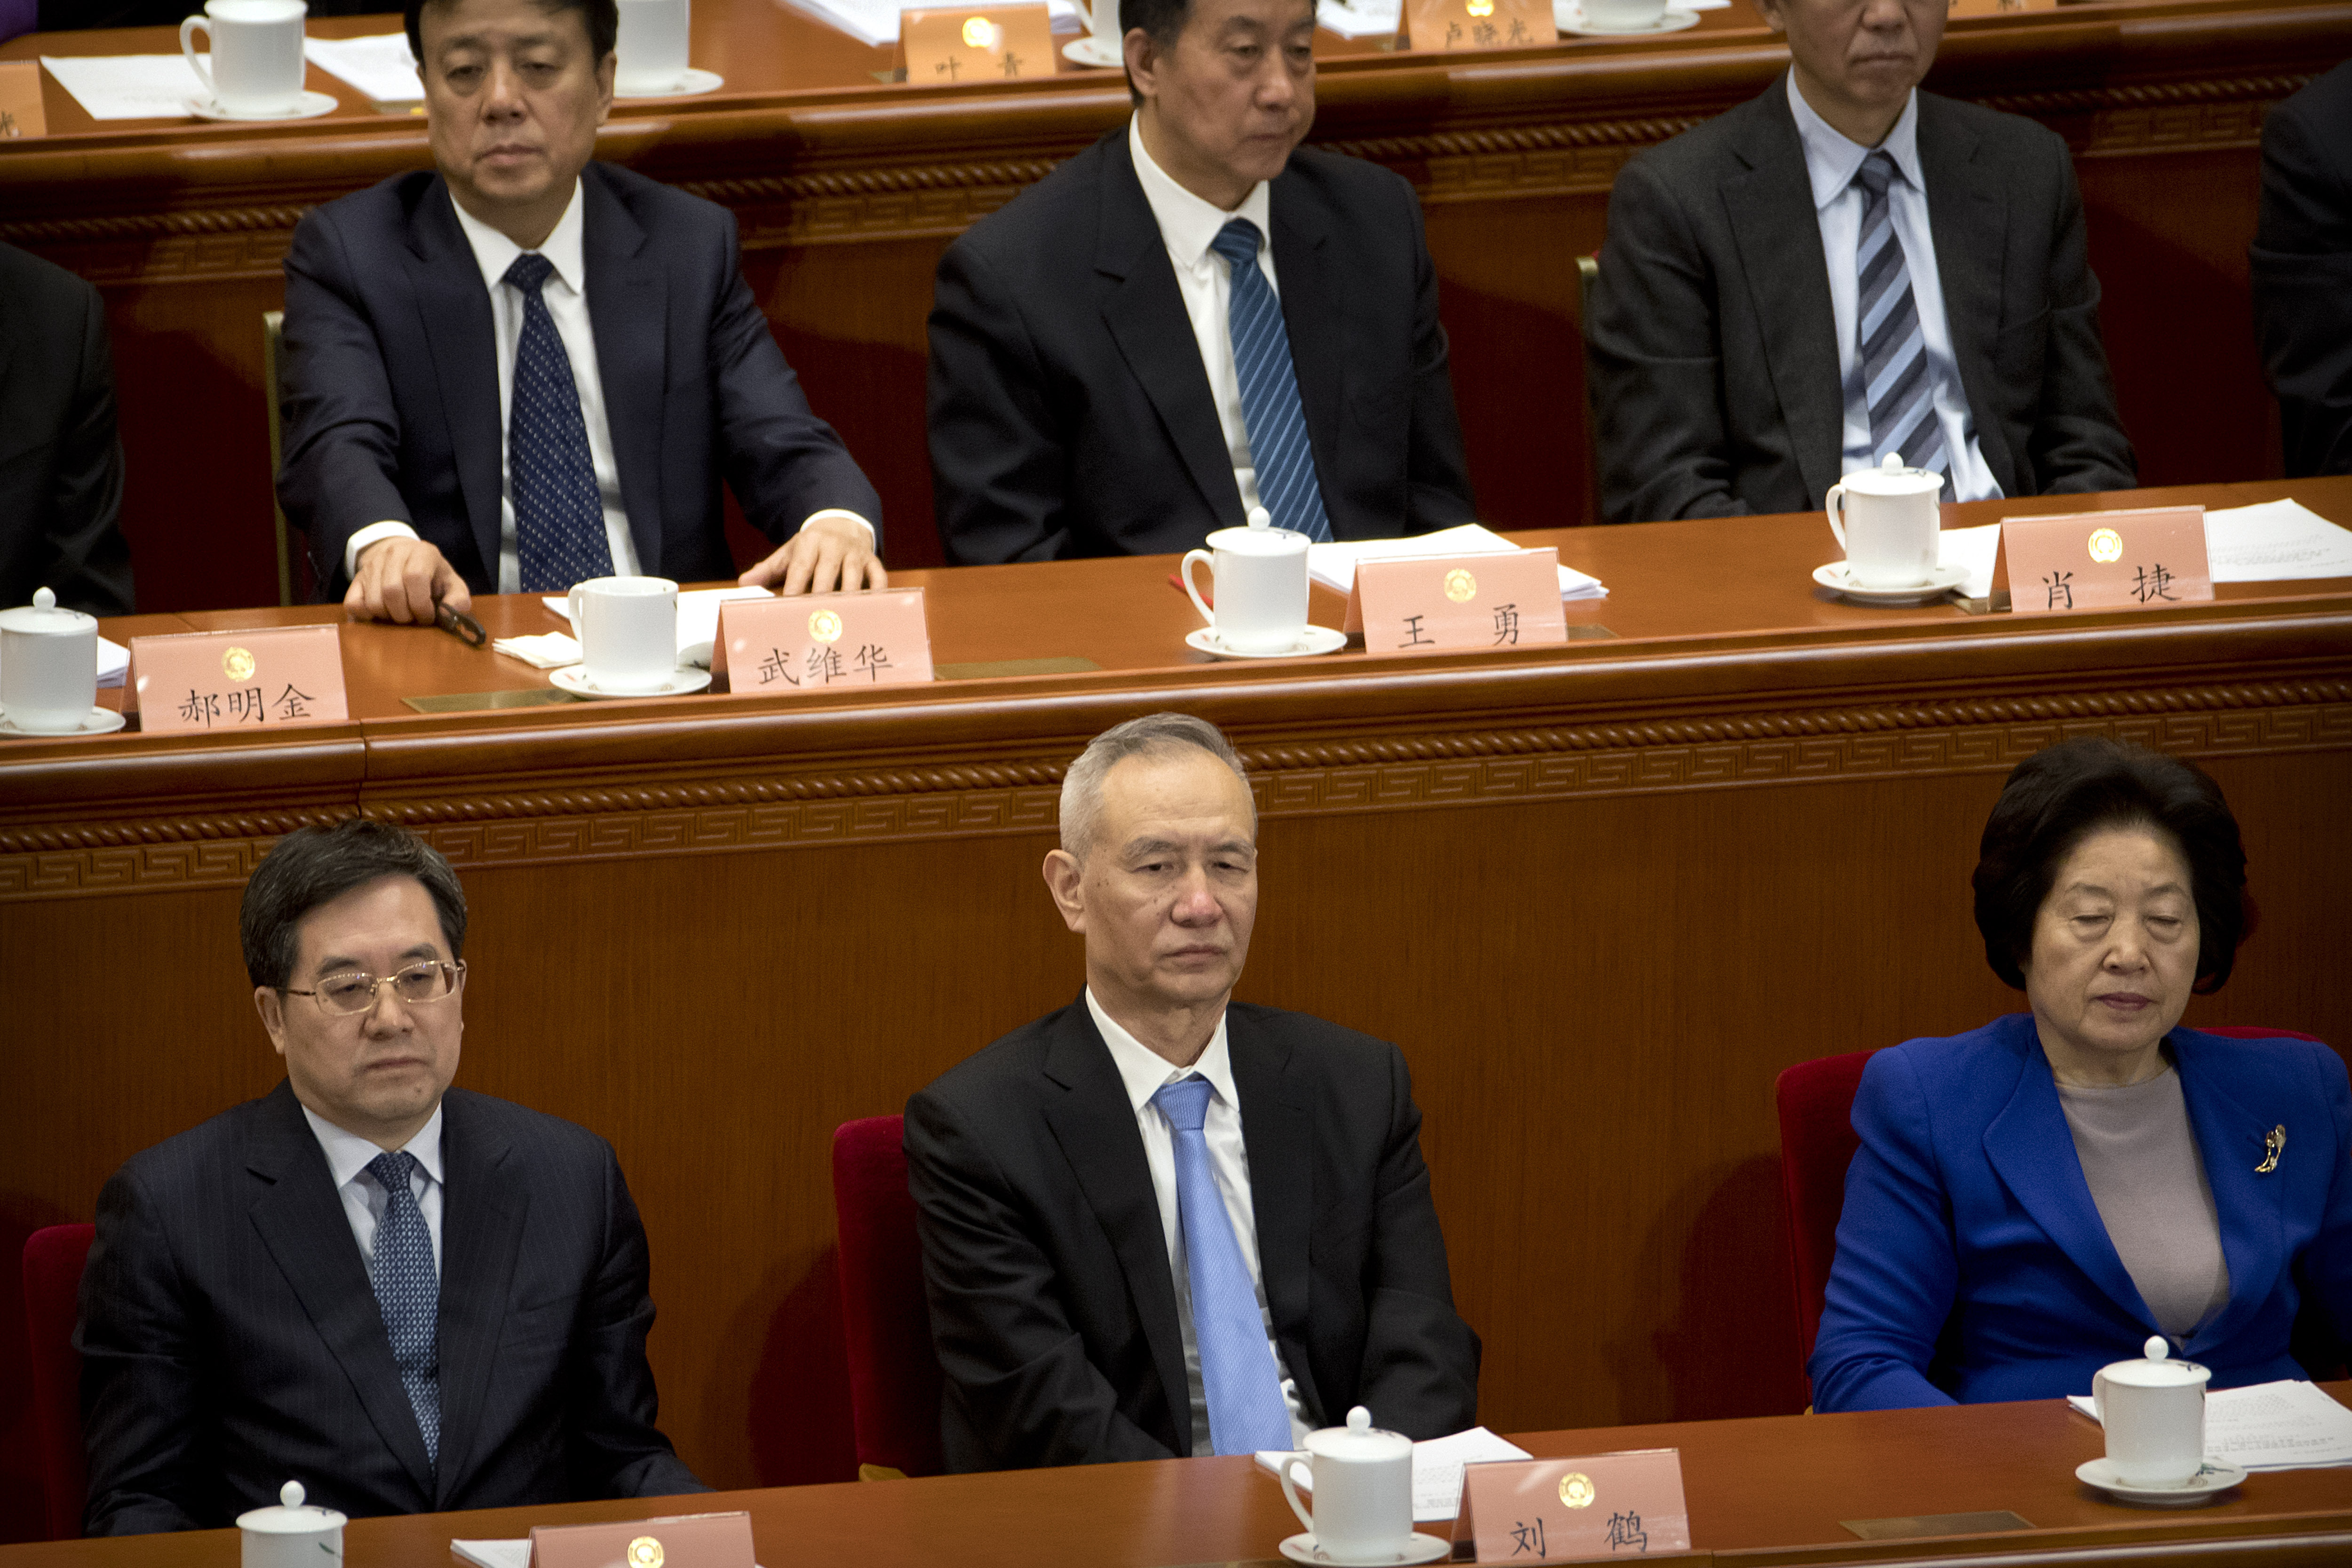 Chinese Vice Premier Liu He, bottom center, attends the closing session of the Chinese People's Political Consultative Conference (CPPCC) at the Great Hall of the People in Beijing, Wednesday, March 13, 2019. (AP Photo/Mark Schiefelbein)